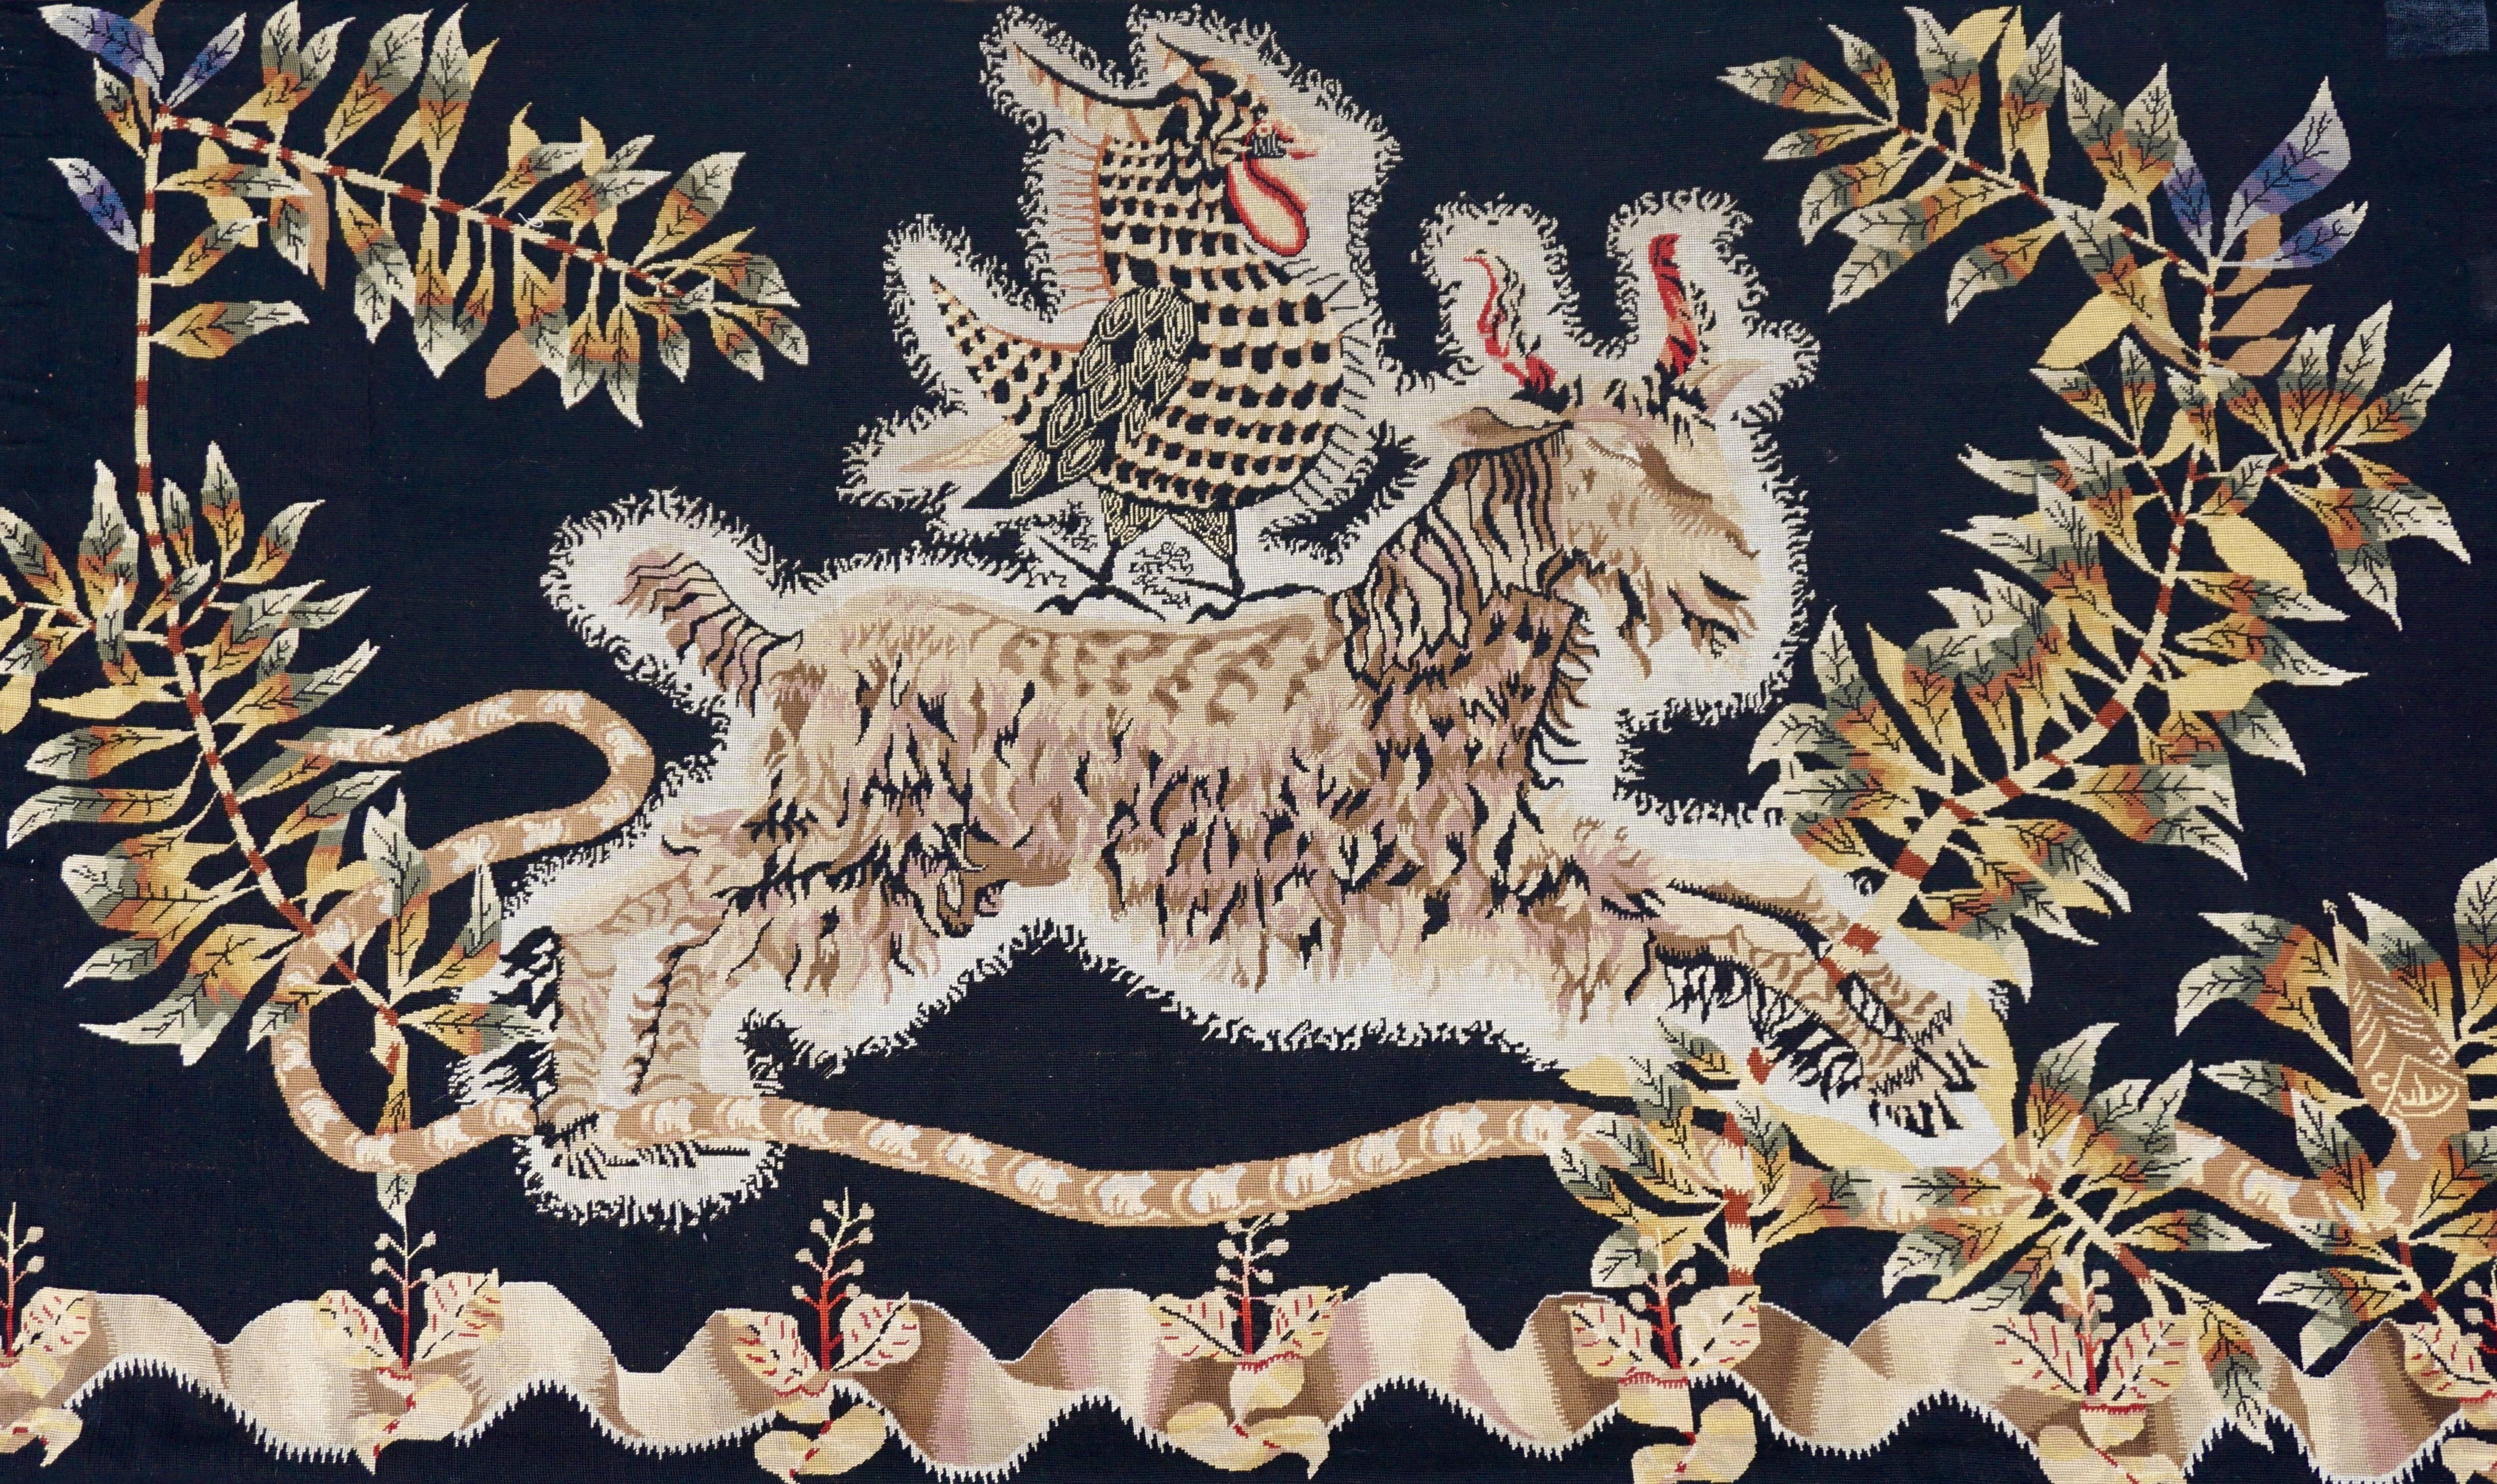 Mid-Century tapestry designed by Jean Lurcat and woven at Atelier Suzanne Goubely-Gatien in Aubusson, France. Hand woven in wool, it dates to the 1950s 

Inspired by an encounter with one of the largest surviving tapestries from the Middle Ages, the